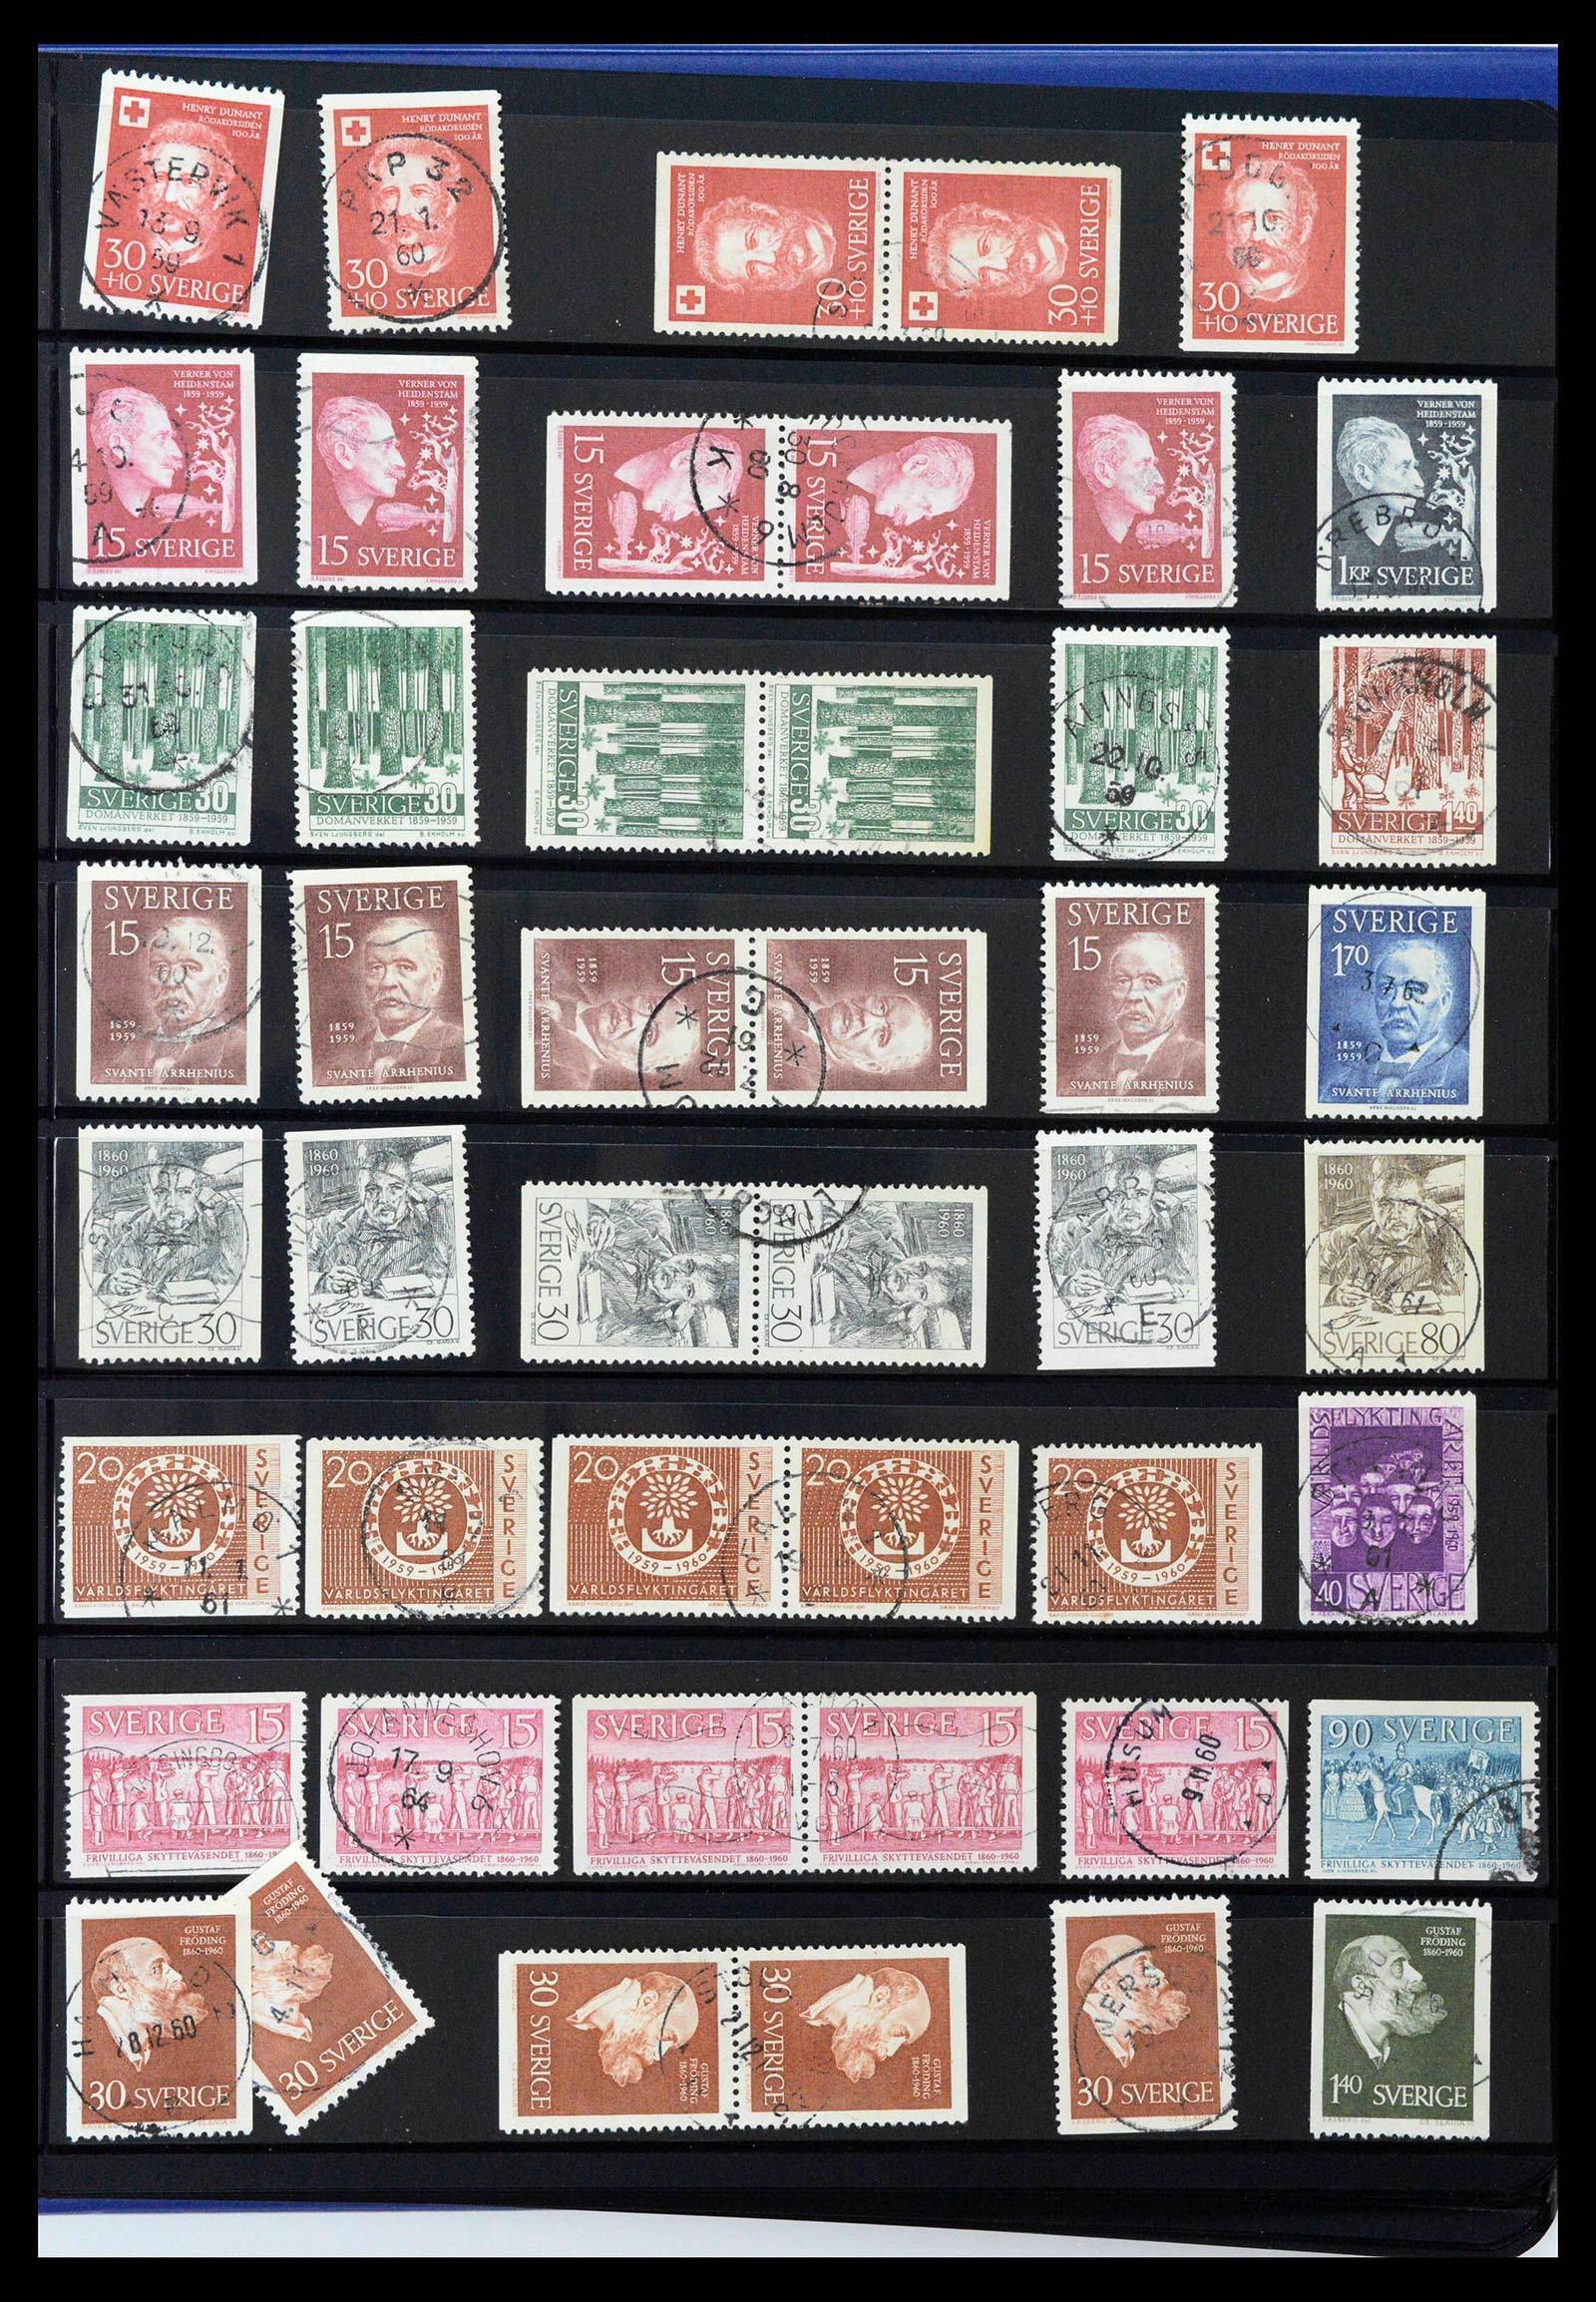 37756 0039 - Stamp collection 37756 Sweden 1858-2002.